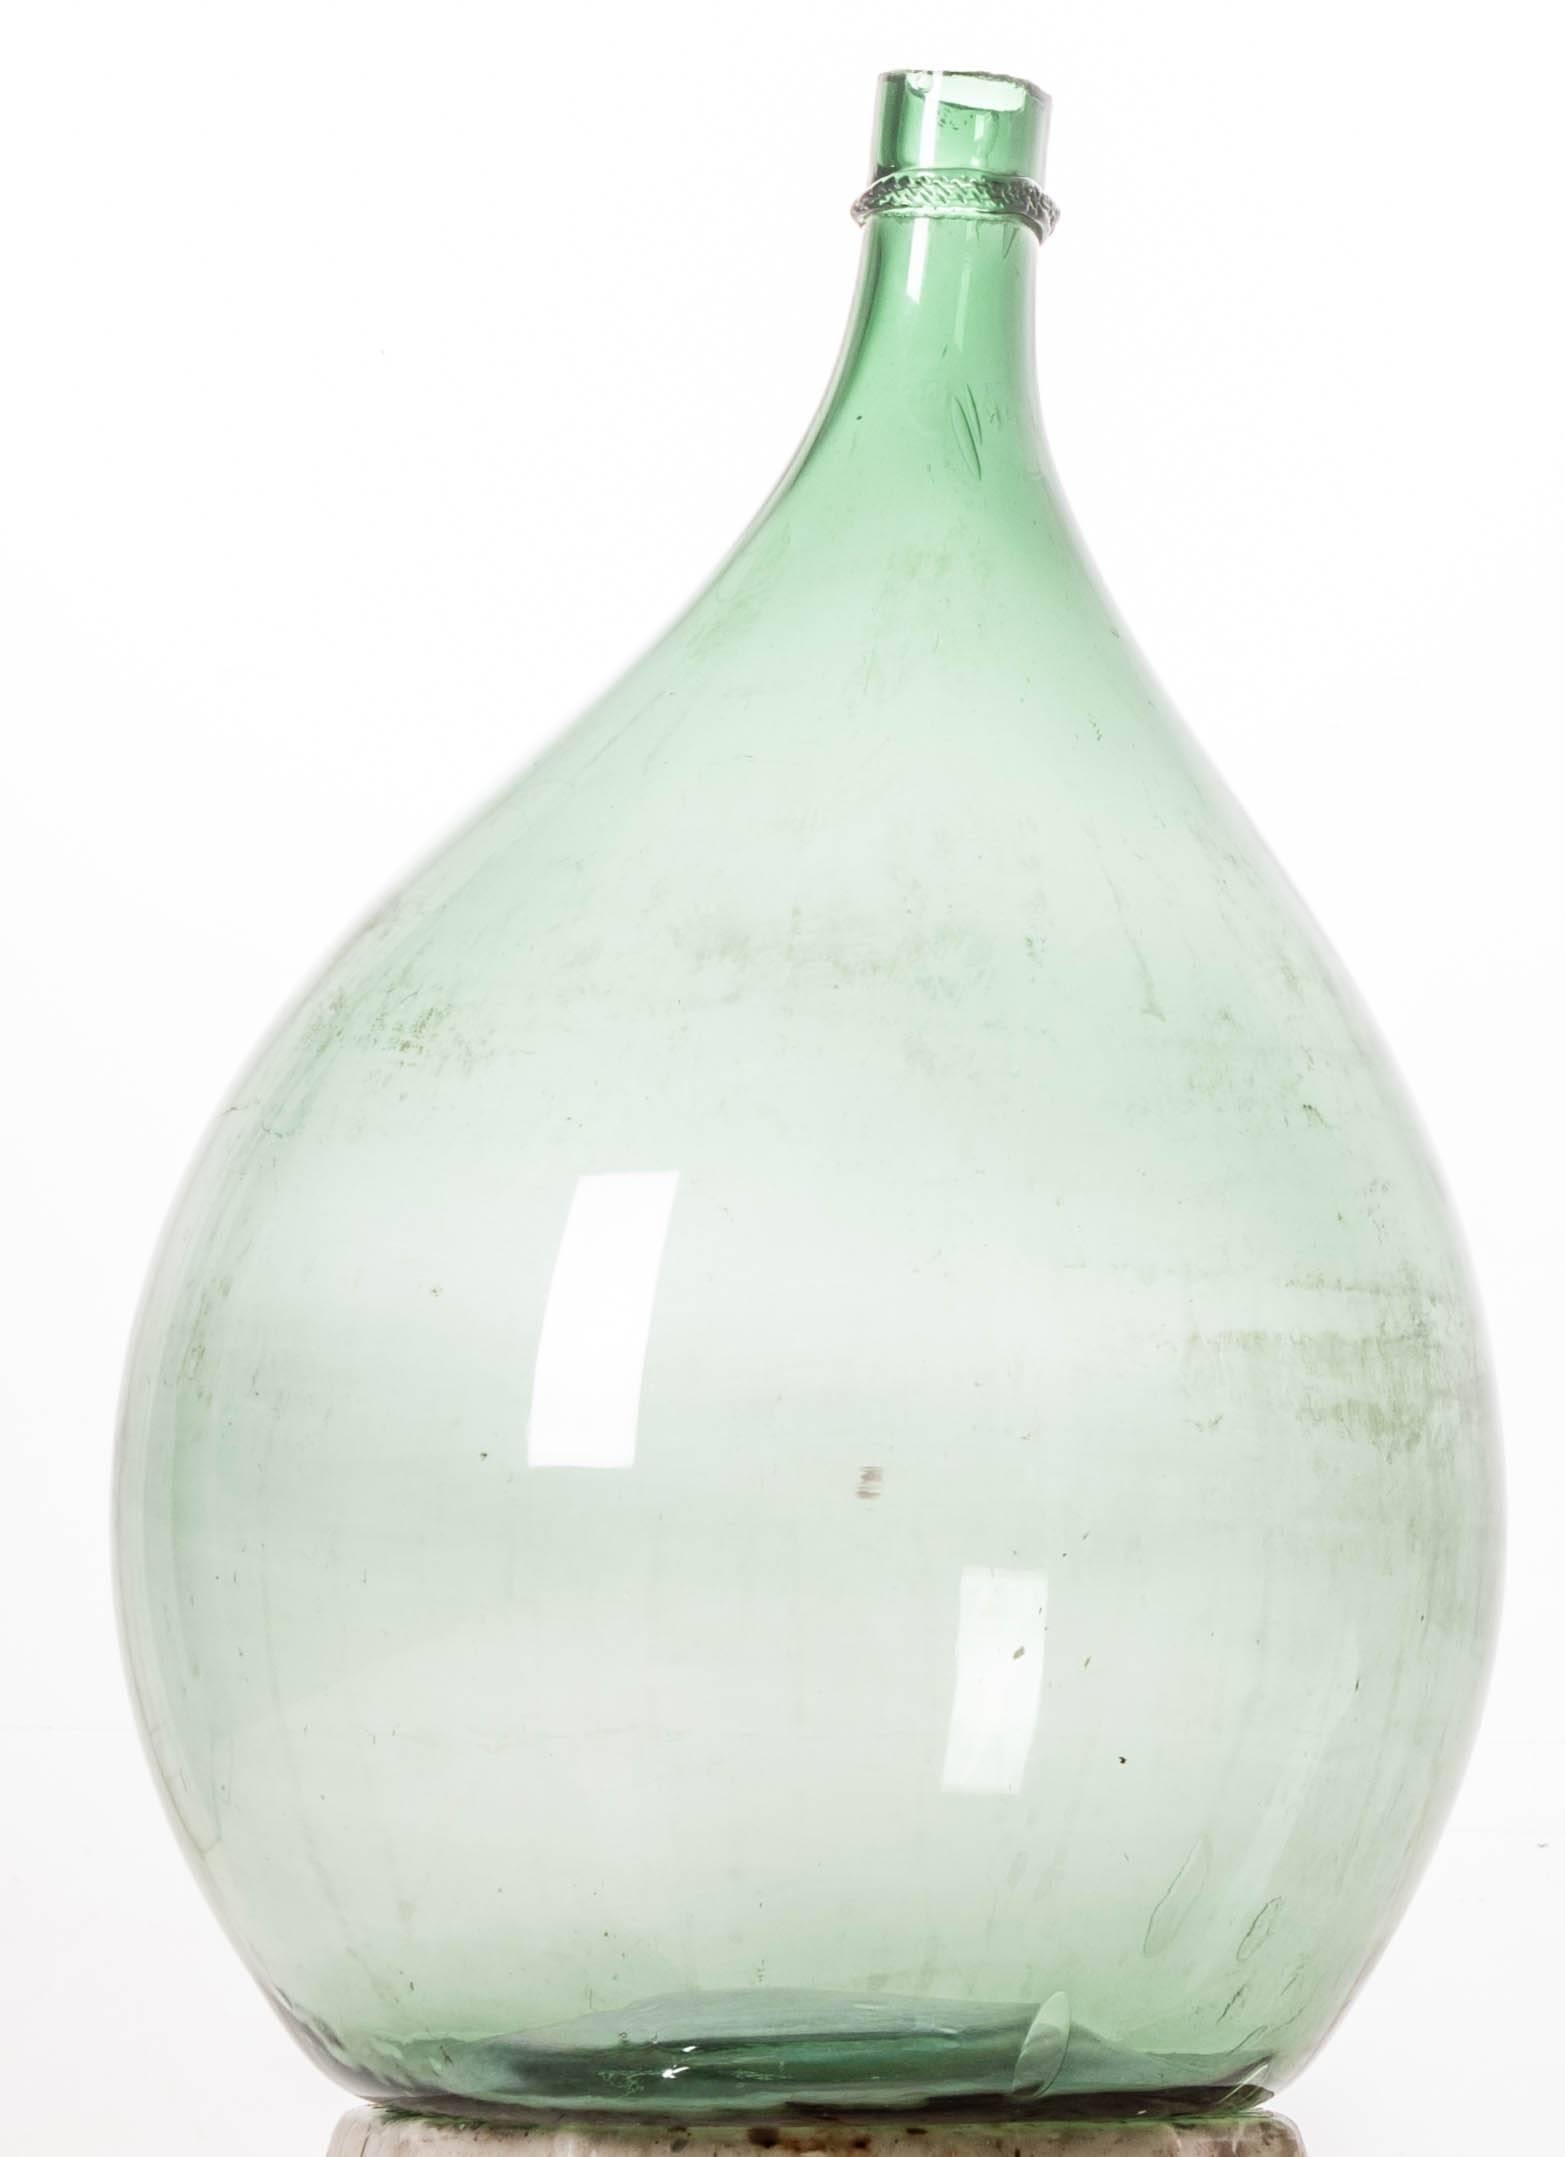 This large, green wine keg, or demijohn as they are sometimes called, remains fully intact after almost 150 years. Still in wonderful condition, this piece would be a wonderful addition to your space, giving it an element of texture and color. Made